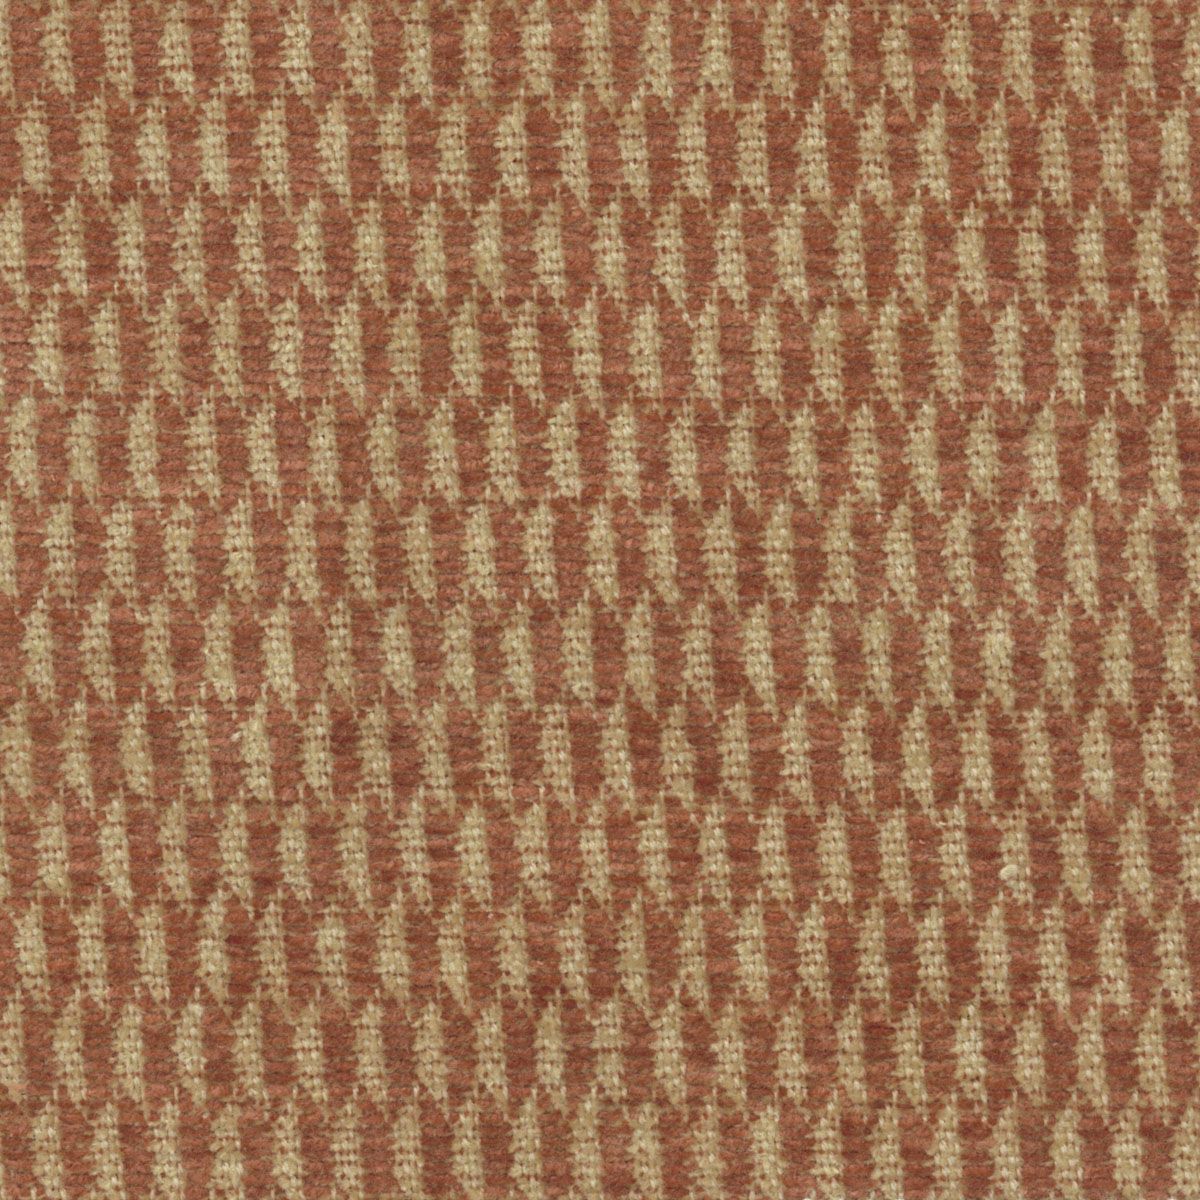 Ridgway Chenille fabric in terracotta color - pattern number PW 00044102 - by Scalamandre in the Old World Weavers collection